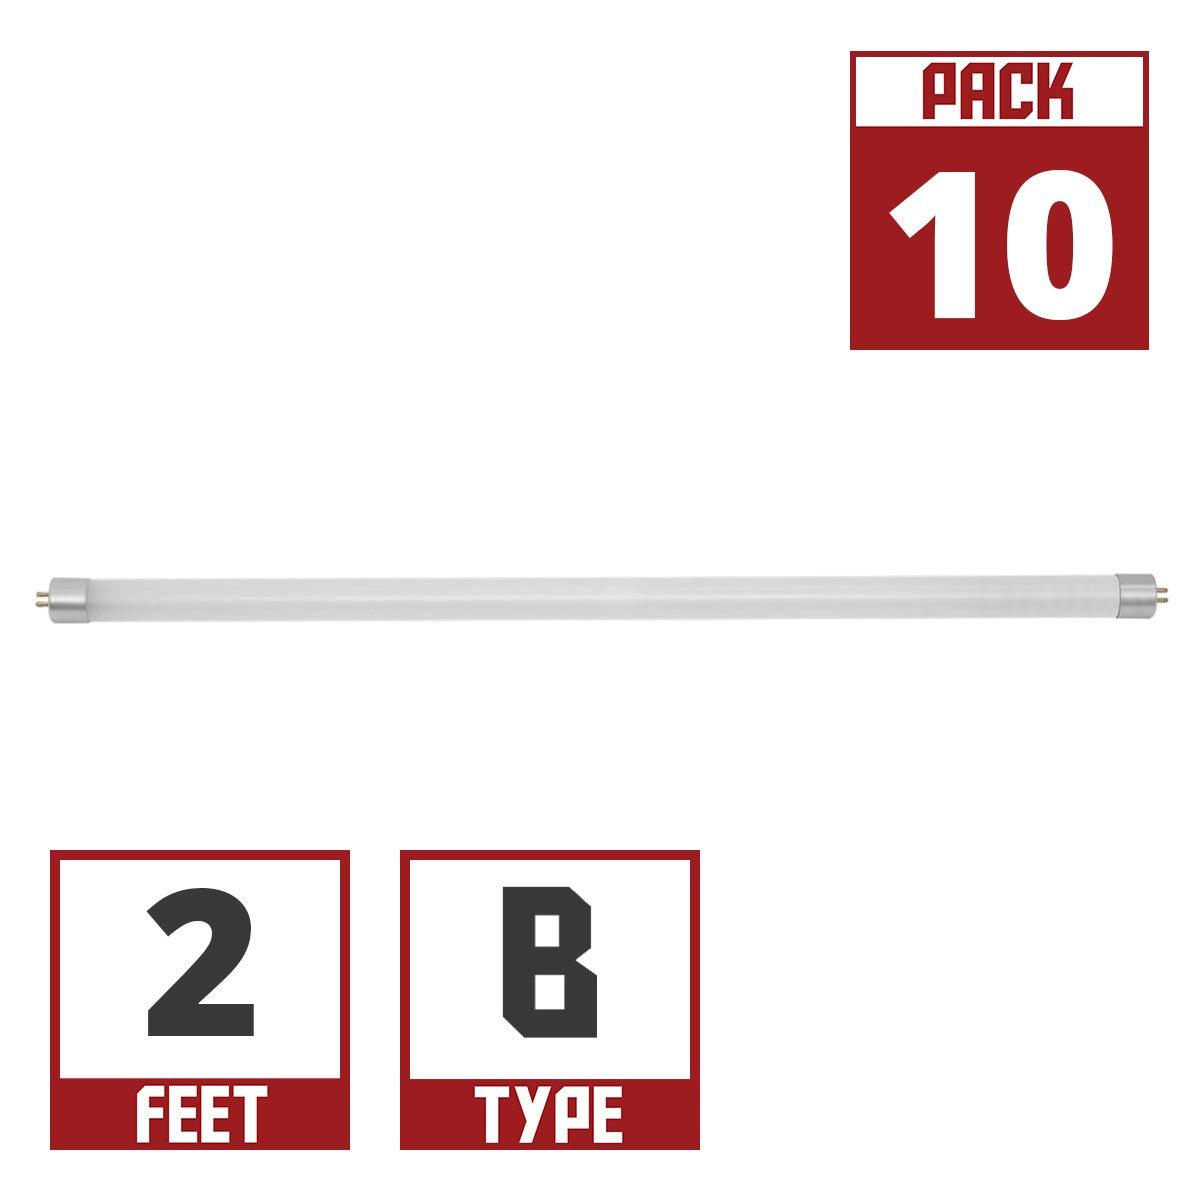 21 Inch LED mini T5 Tube, 7 Watt, 700 Lumens, 3000K, F13T5 Replacement, Ballast Bypass, Double End, G5 Base (Case Of 10) - Bees Lighting